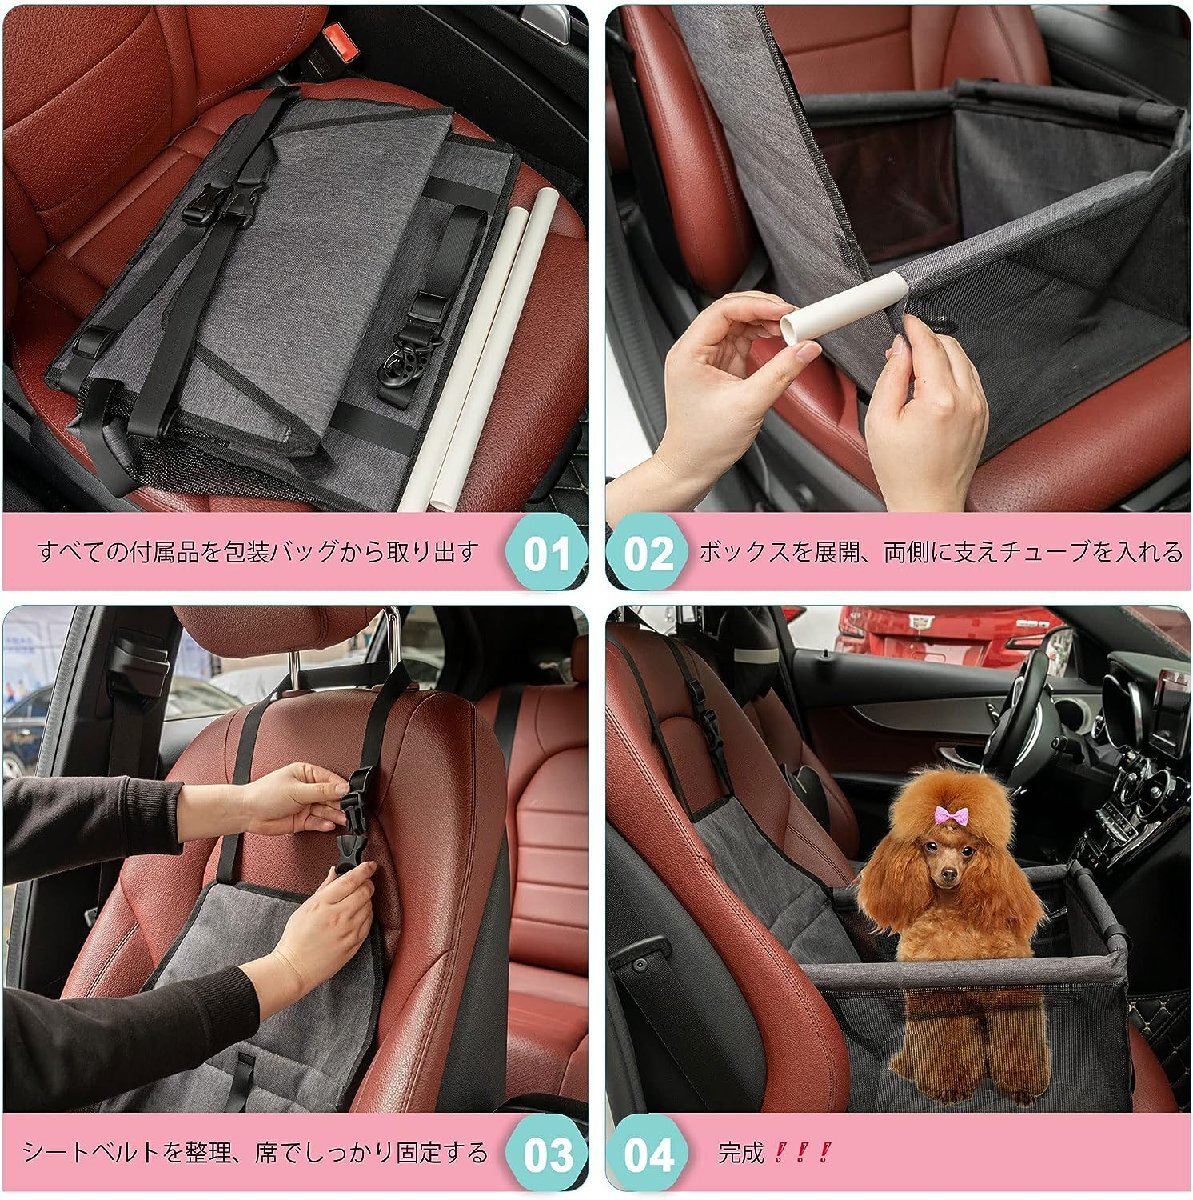  Drive box car seat pet Carry dog stone chip .. prevention waterproof pet folding after part seat passenger's seat cat Drive goods pet accessories in-vehicle 